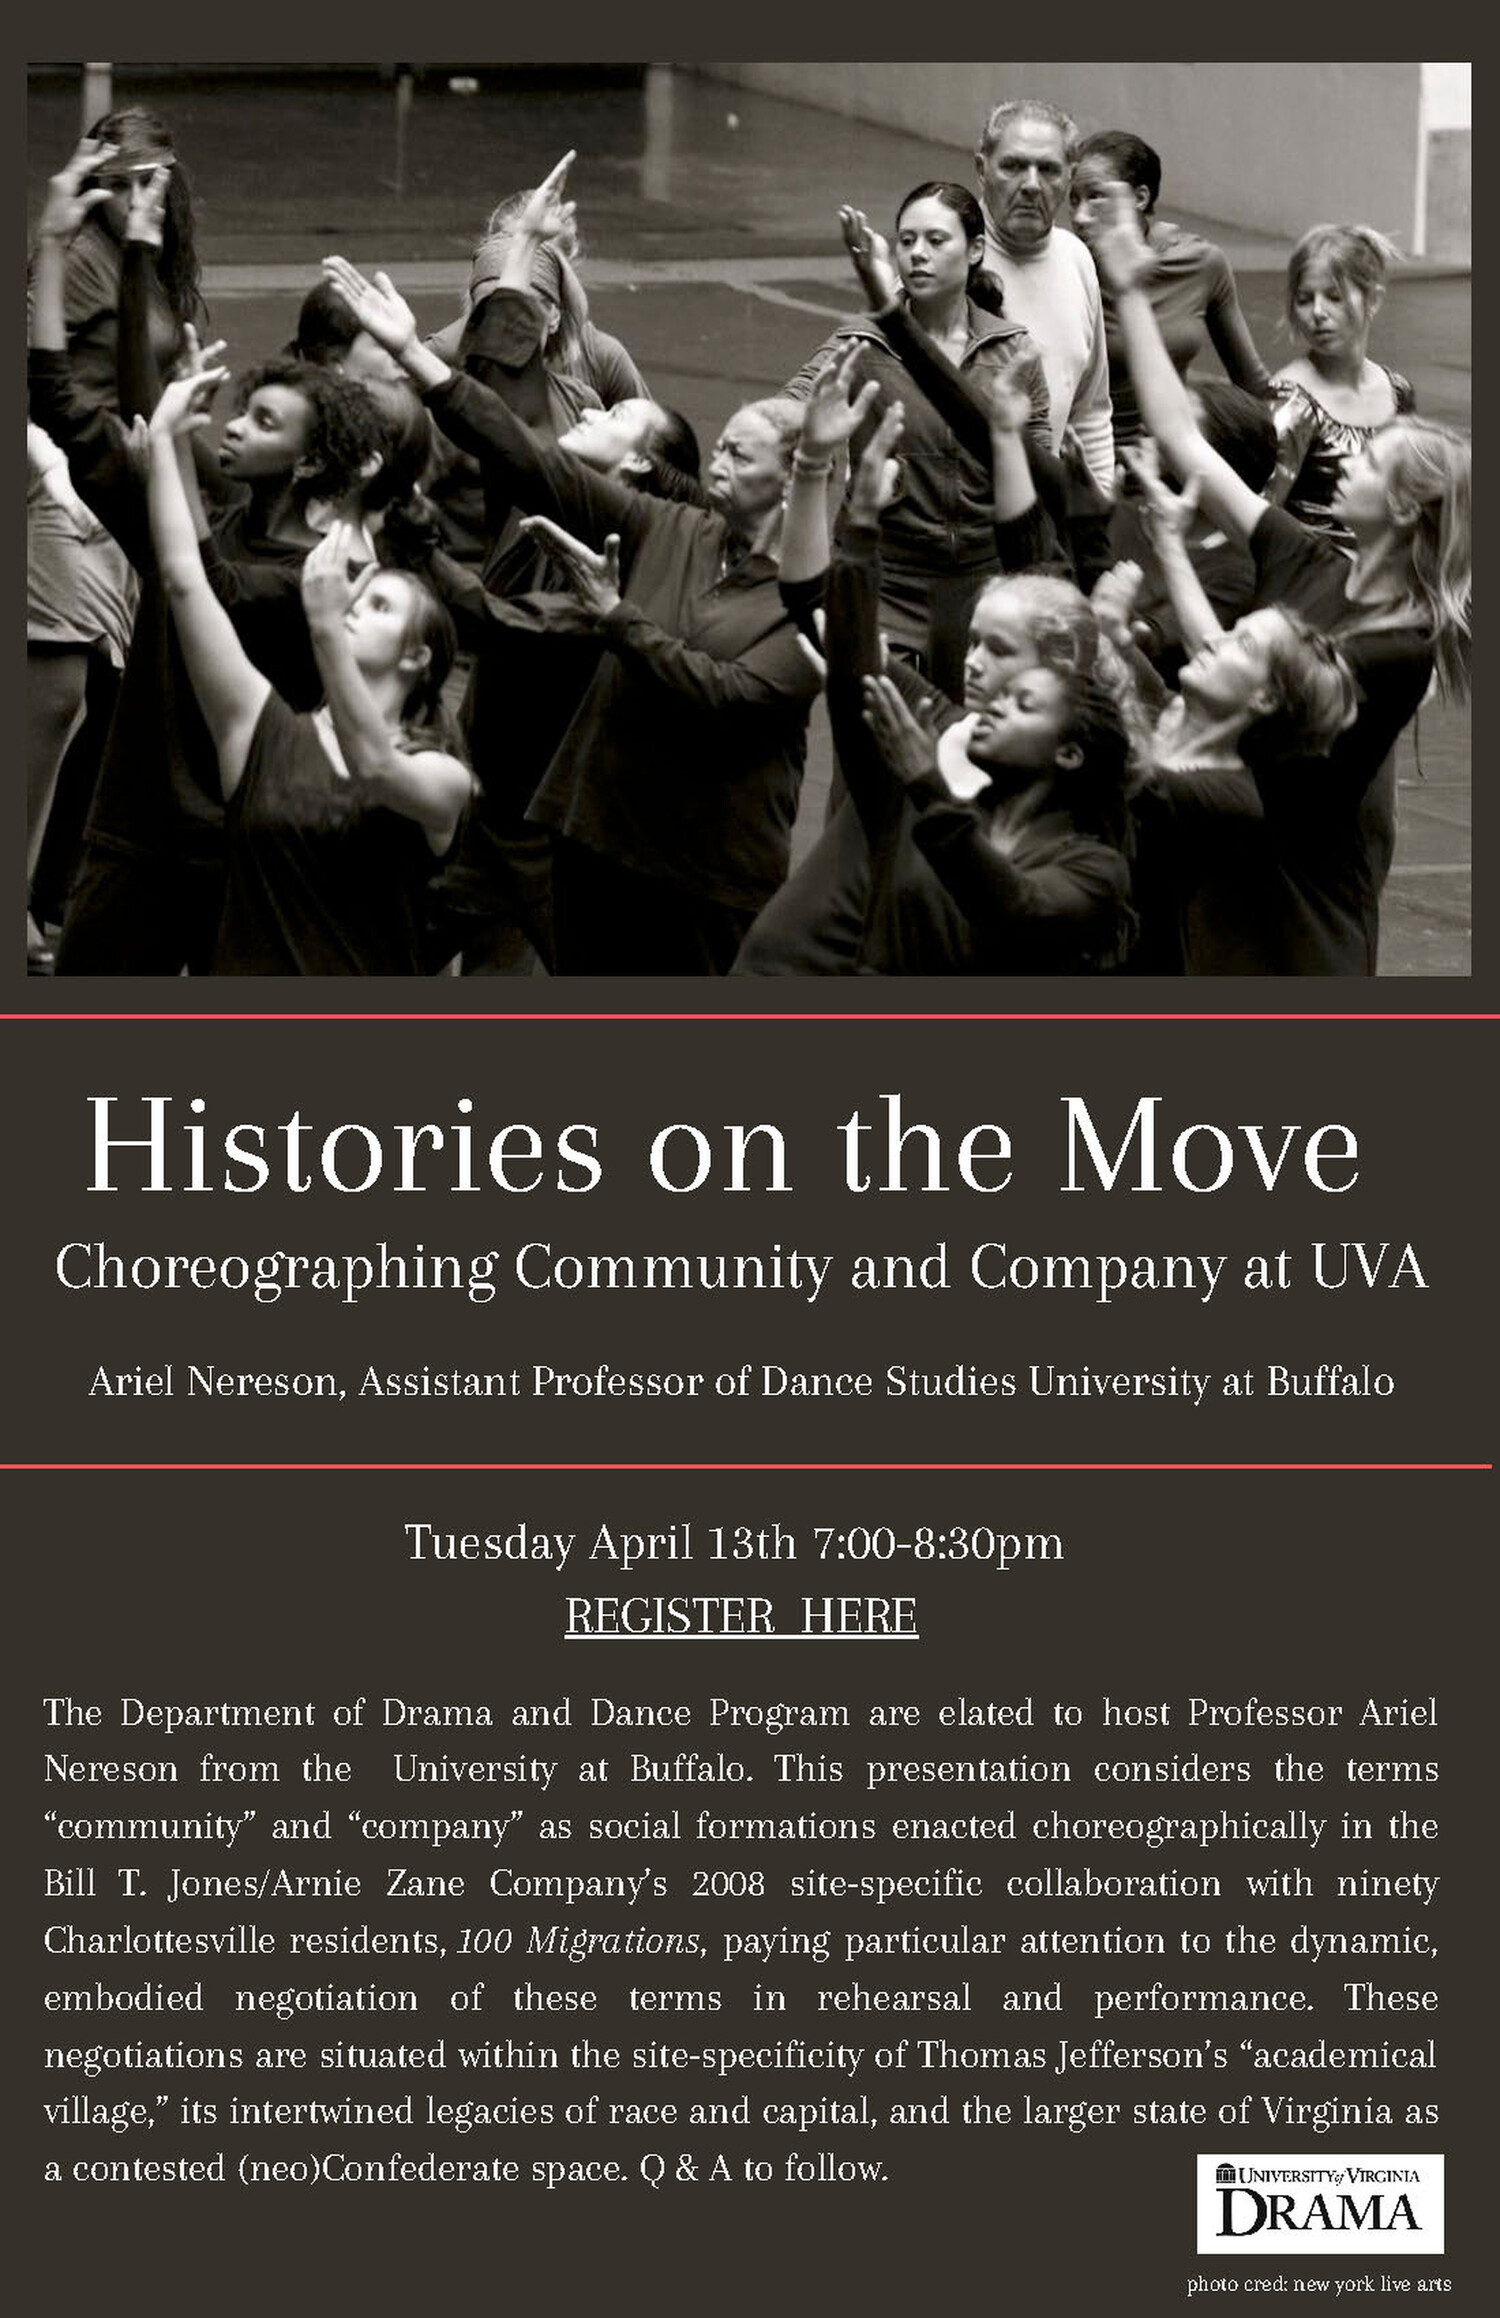 Histories on the Move; Choreographing Community and Company at UVA - Ariel Nereson, Assistant Professor of Dance Studies University at Buffalo